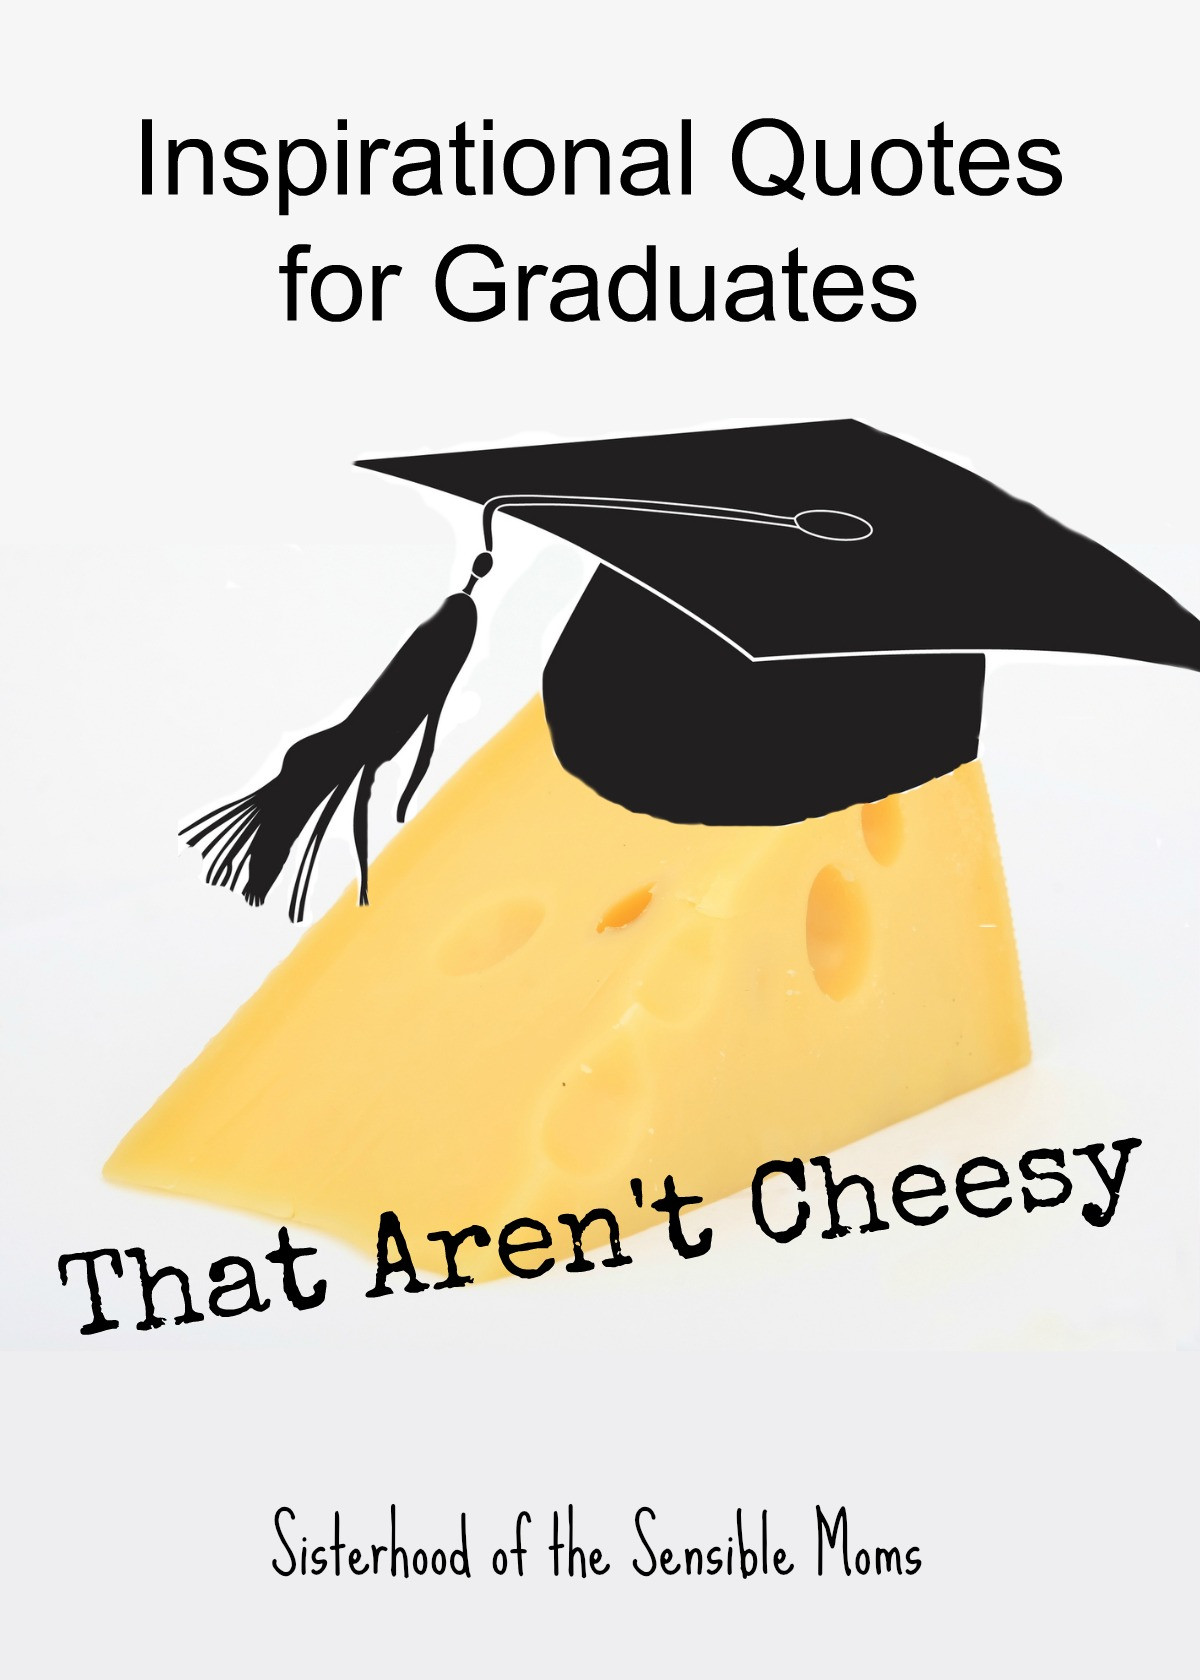 Quotes For Graduation Speech
 Inspirational Quotes for Graduates That Aren t Cheesy